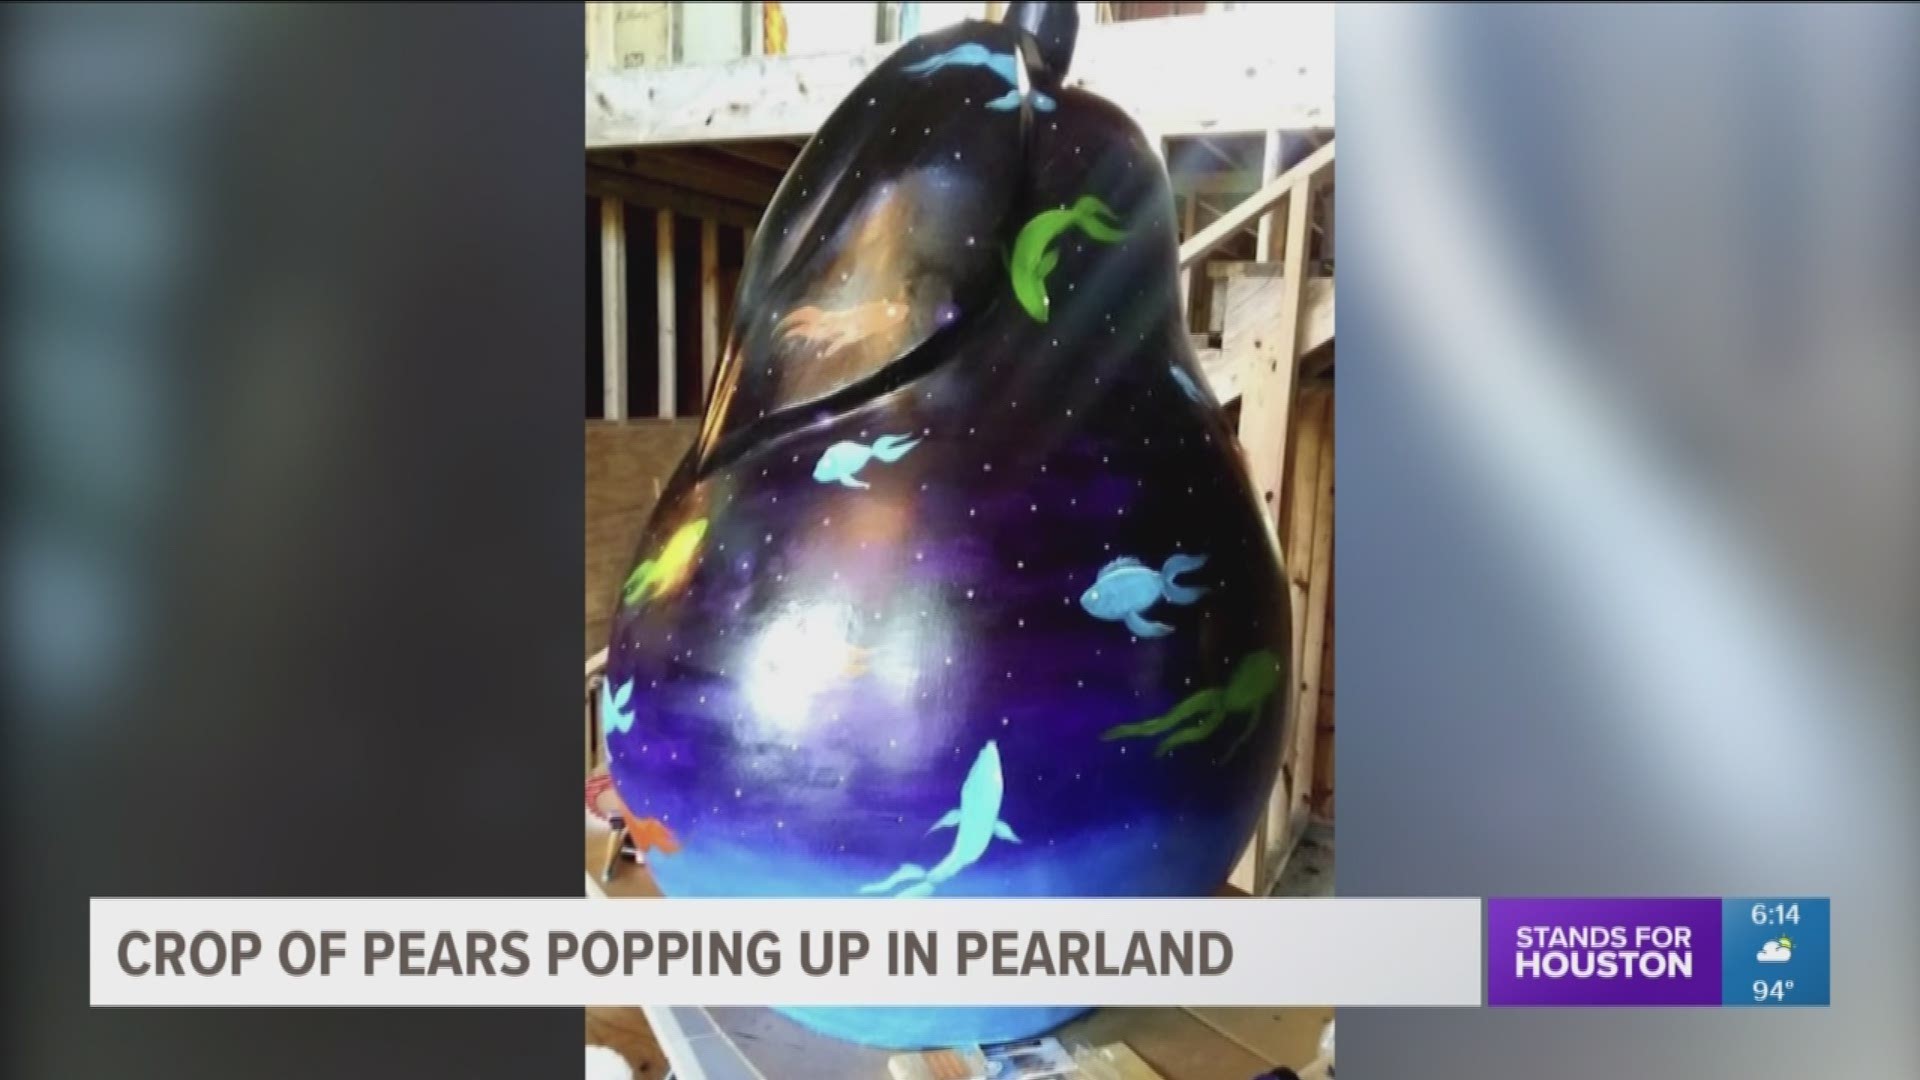 The community of Pearland lost many of its pear orchards during the great Galveston hurricane in 1900, but now there's a new crop of pears popping up and they are becoming special works of art.